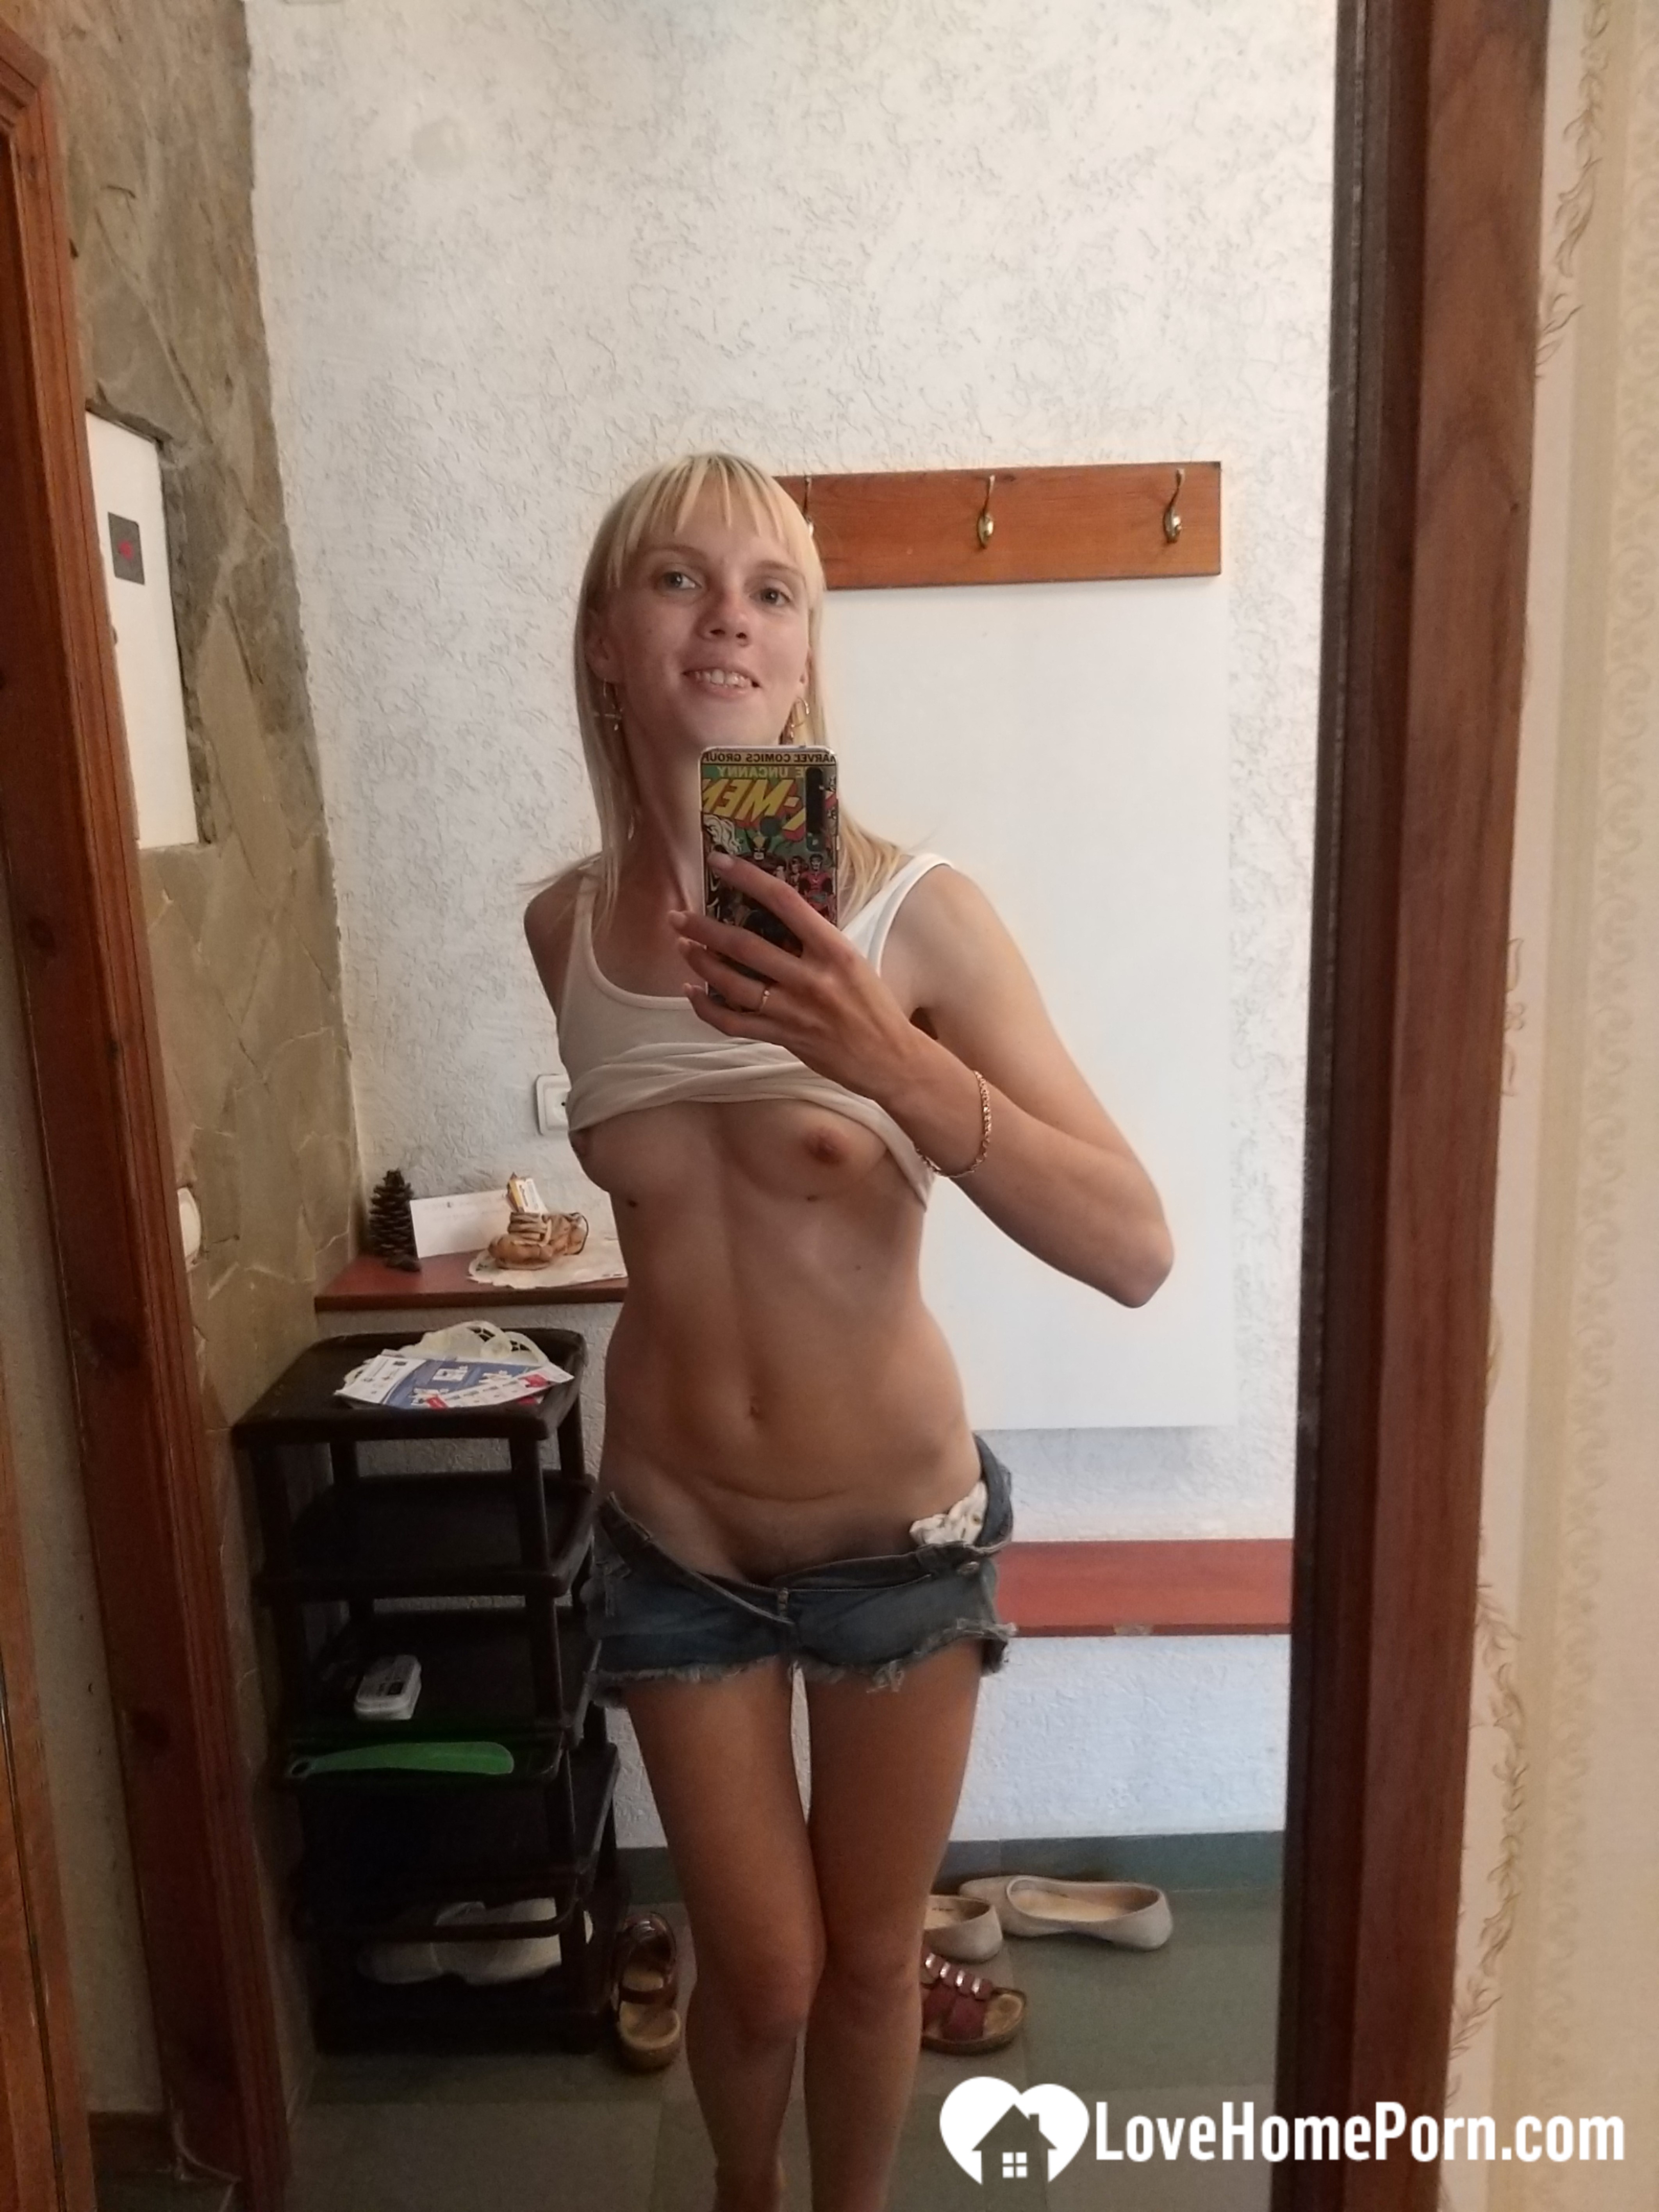 Lusty French blonde wants some of your attention